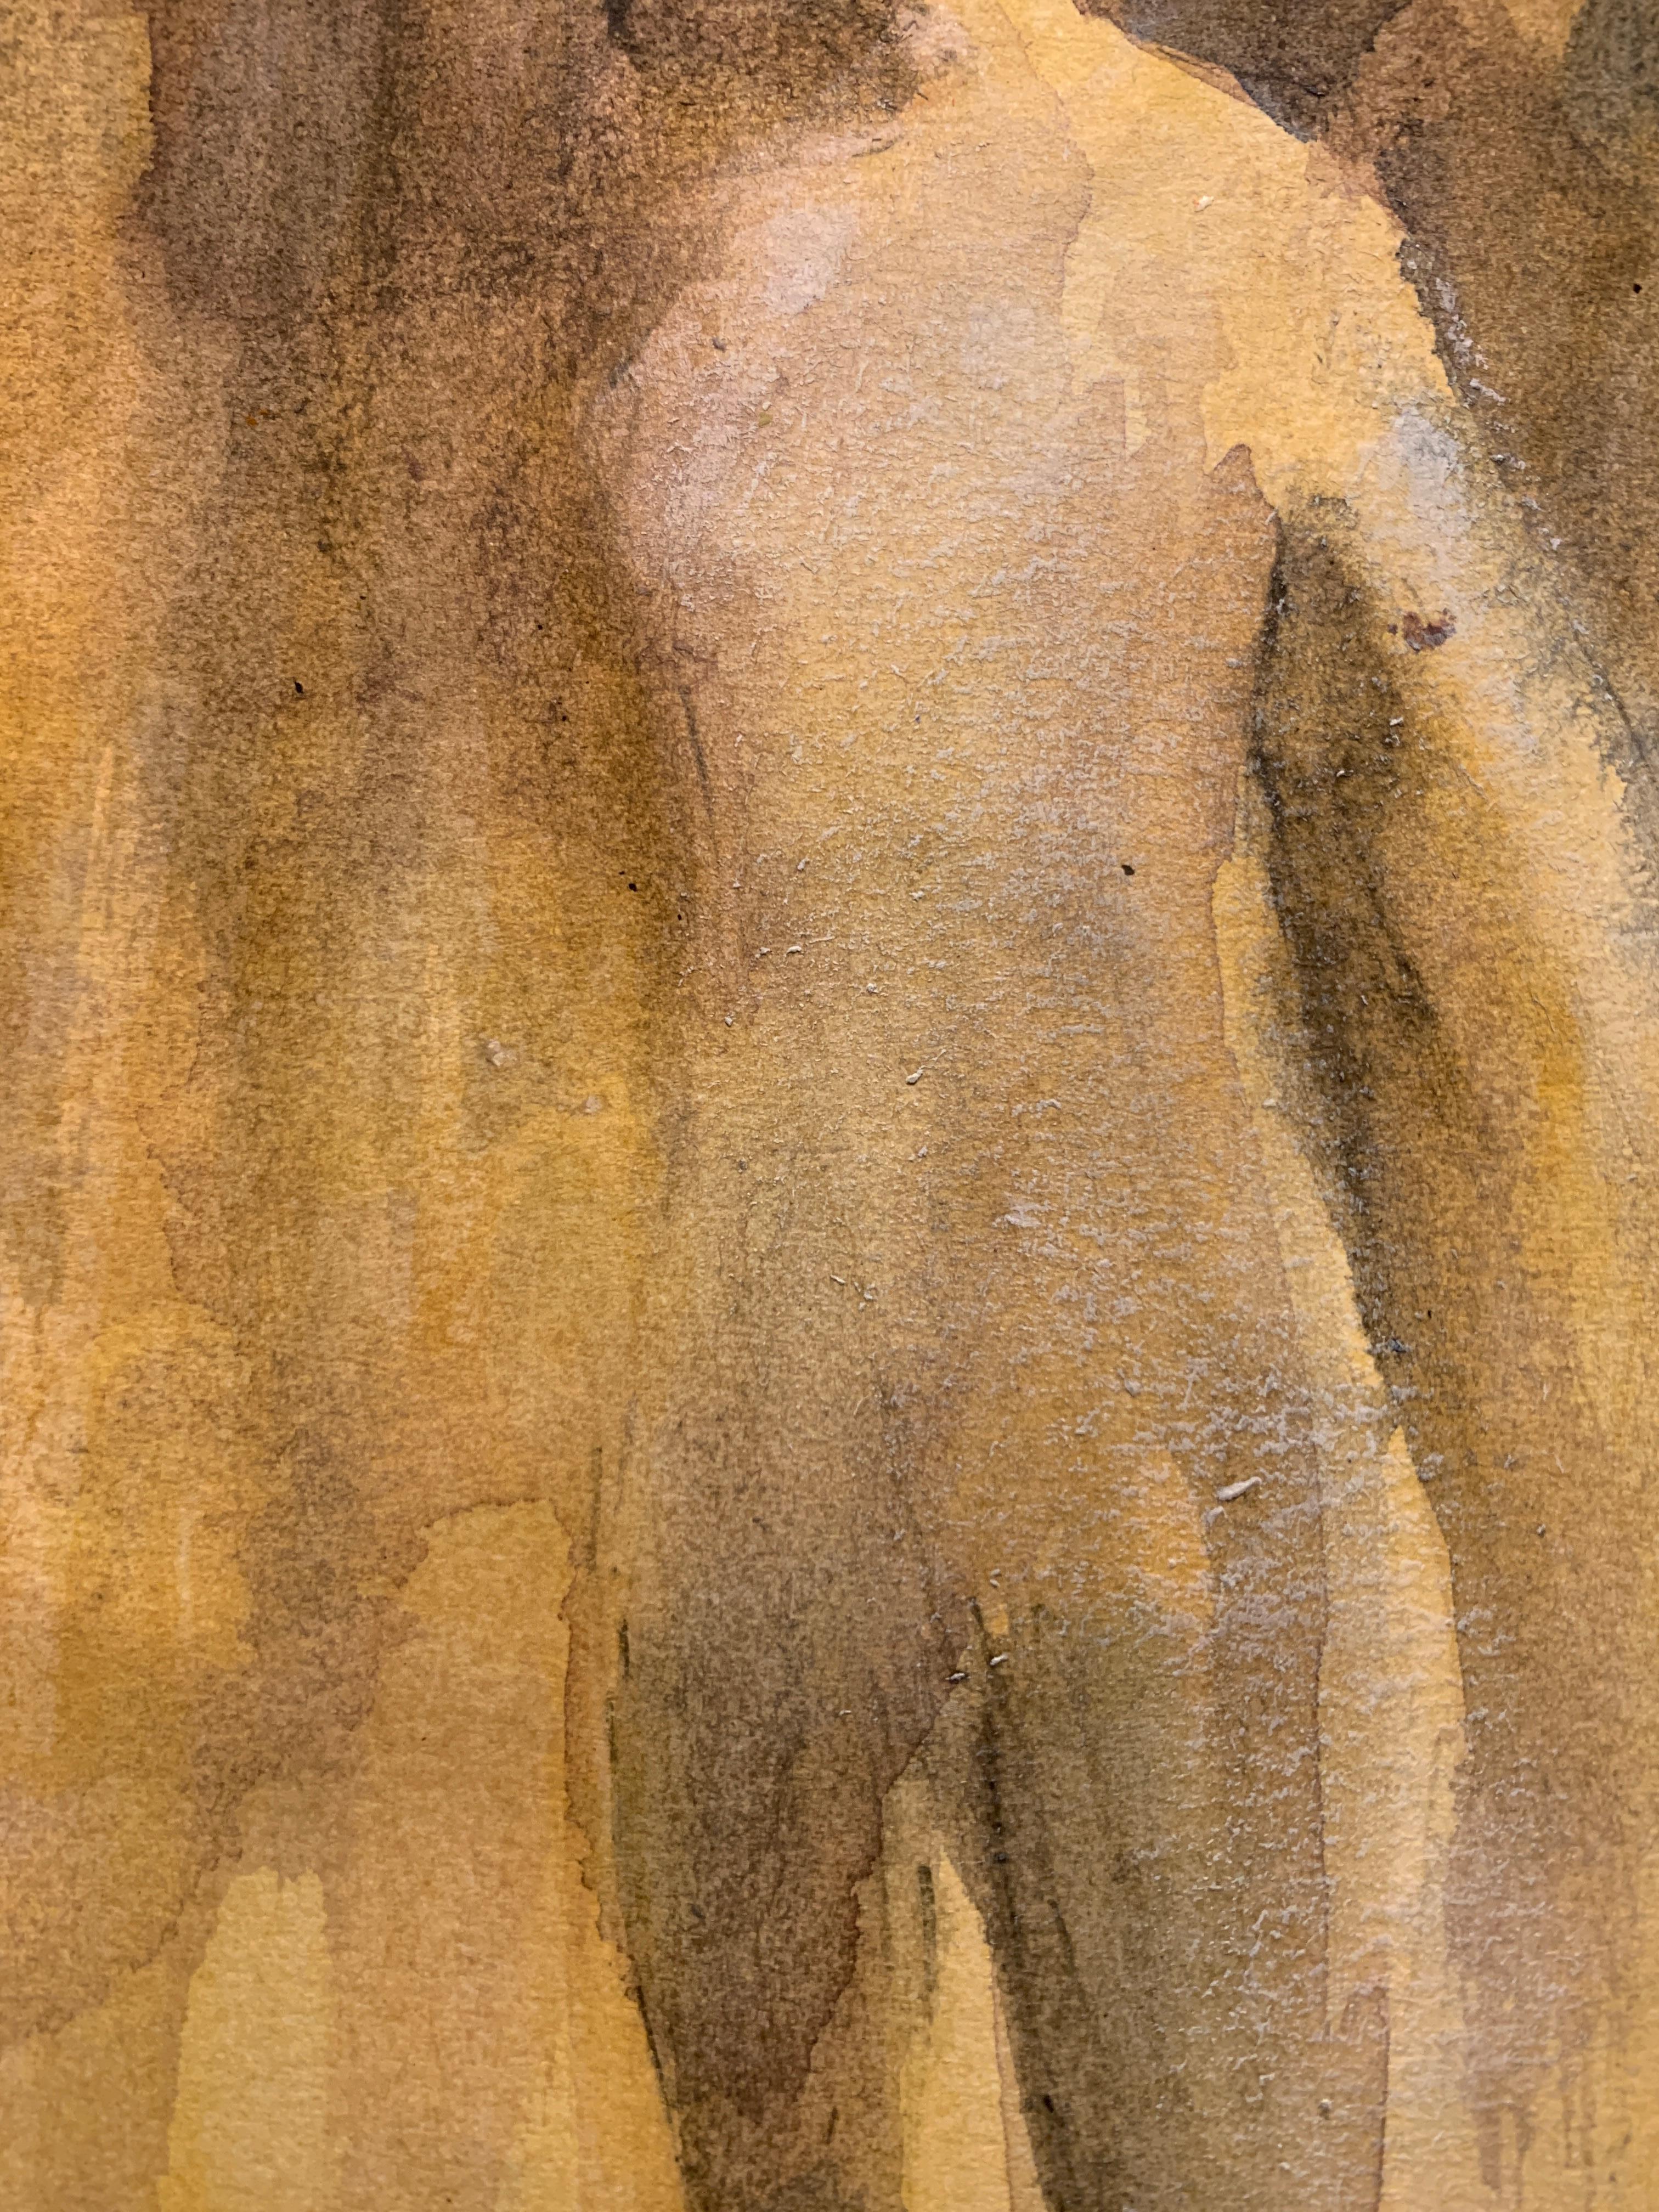 English abstract 20th century oil sketch of a figure in brown and ochre - Abstract Expressionist Painting by Bertha Long